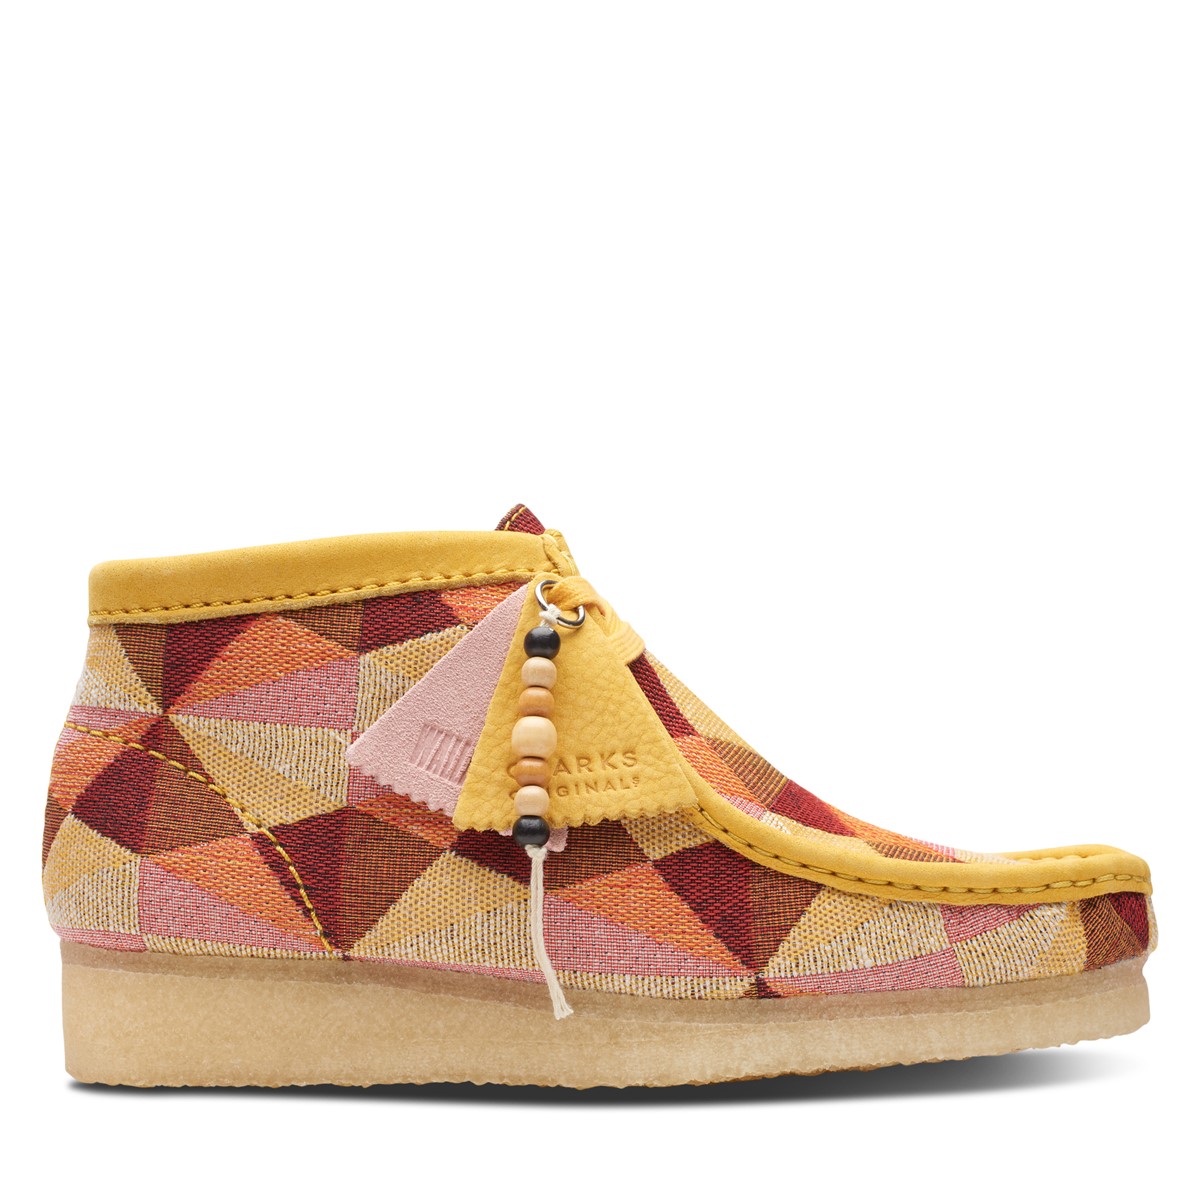 Women's Wallabee Moccasin Boots in Yellow/Jacquard